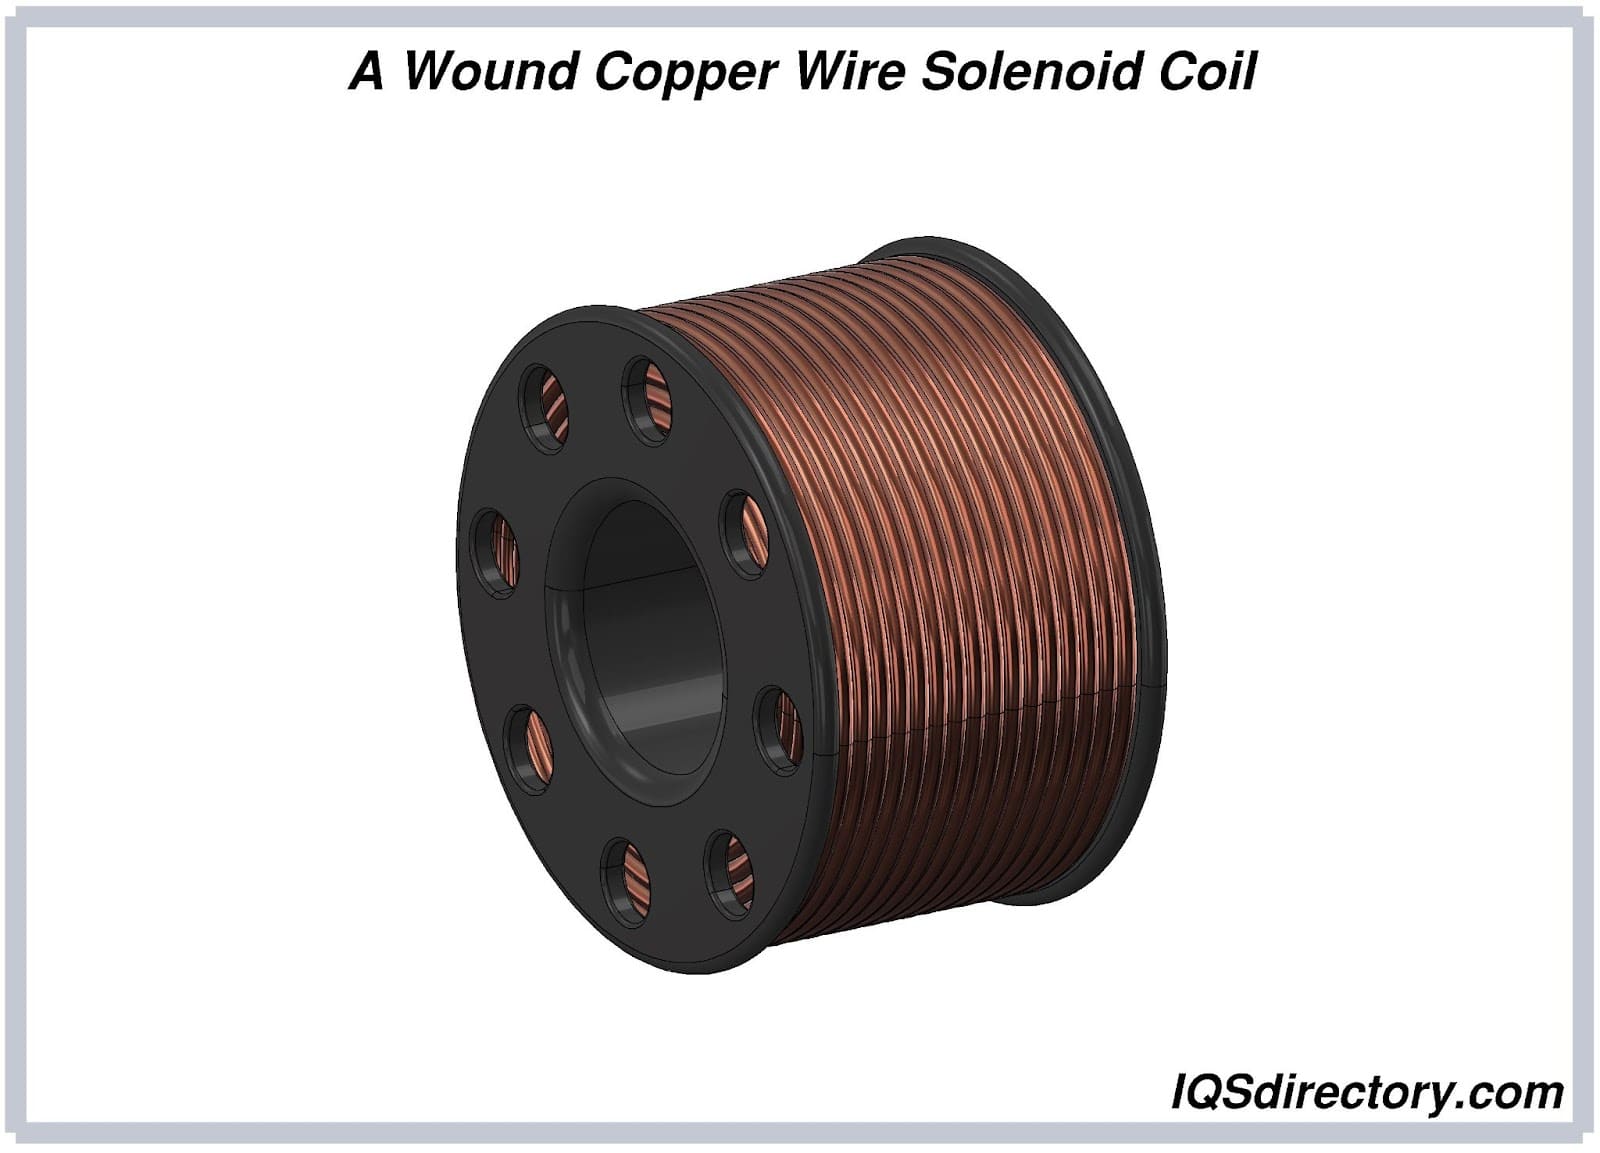 A Wound Copper Wire Solenoid Coil